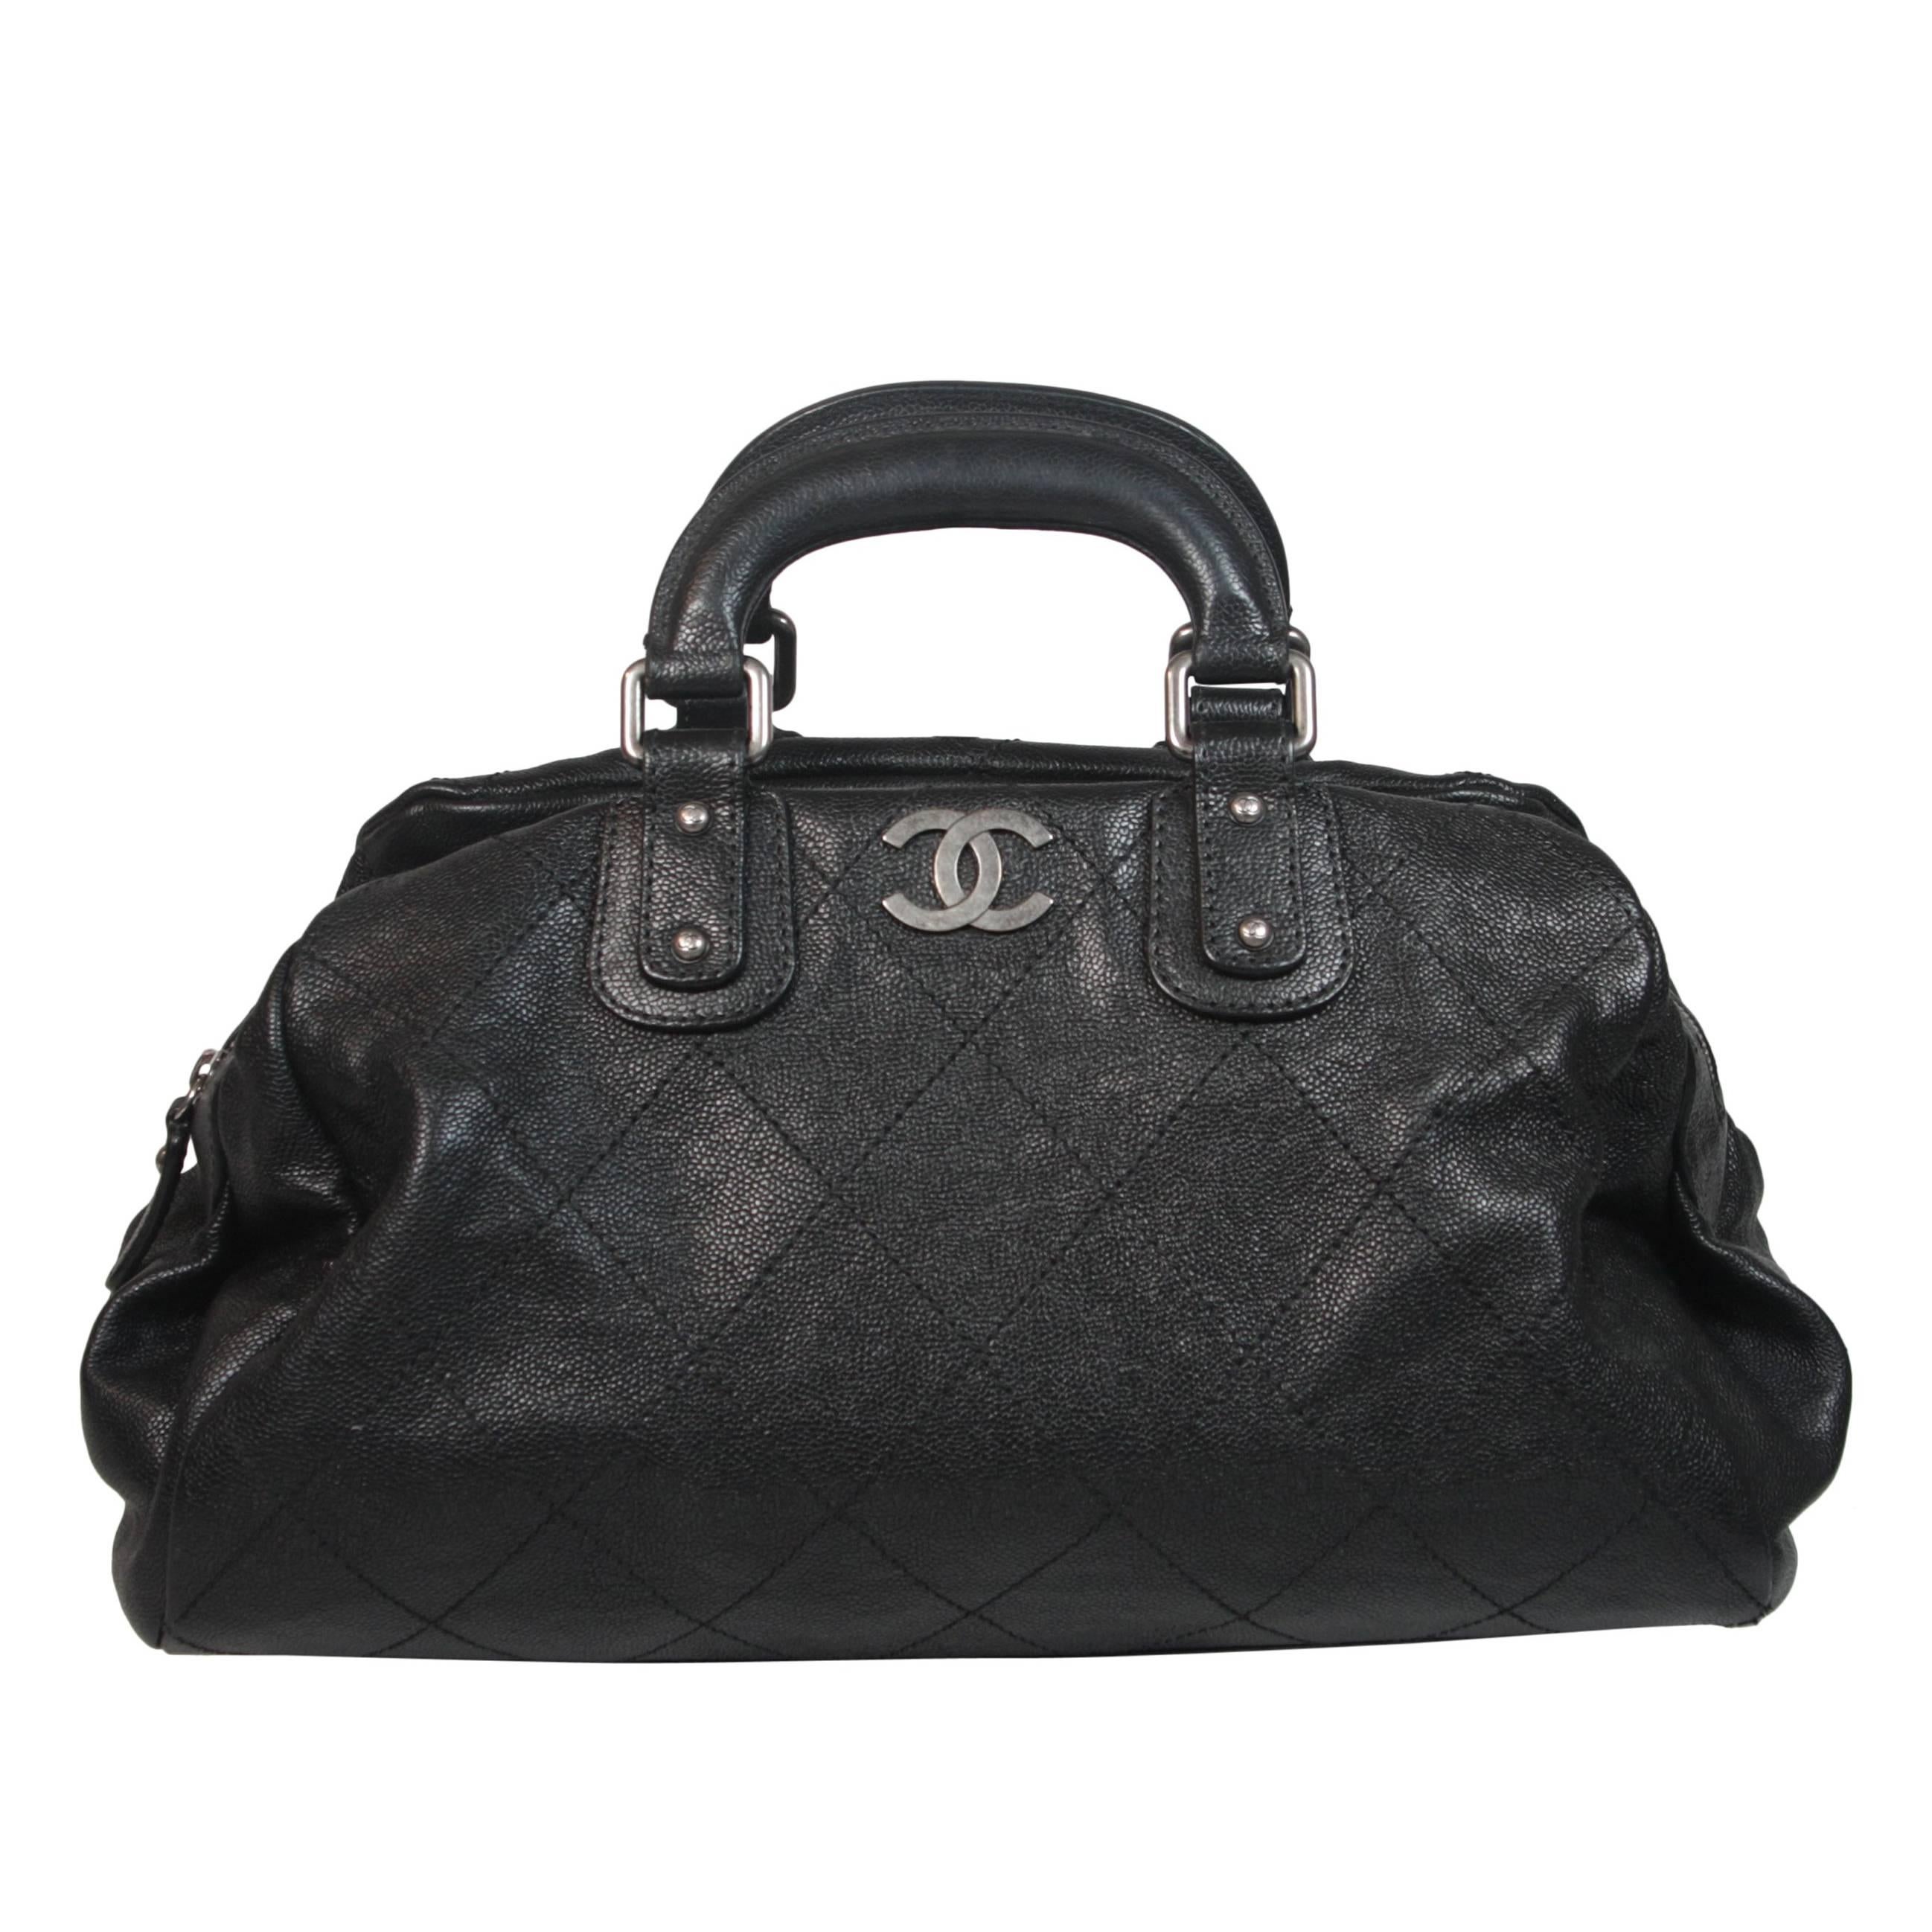 CHANEL Double Top Handle Black Caviar Leather Doctor Bag Excellent Condition